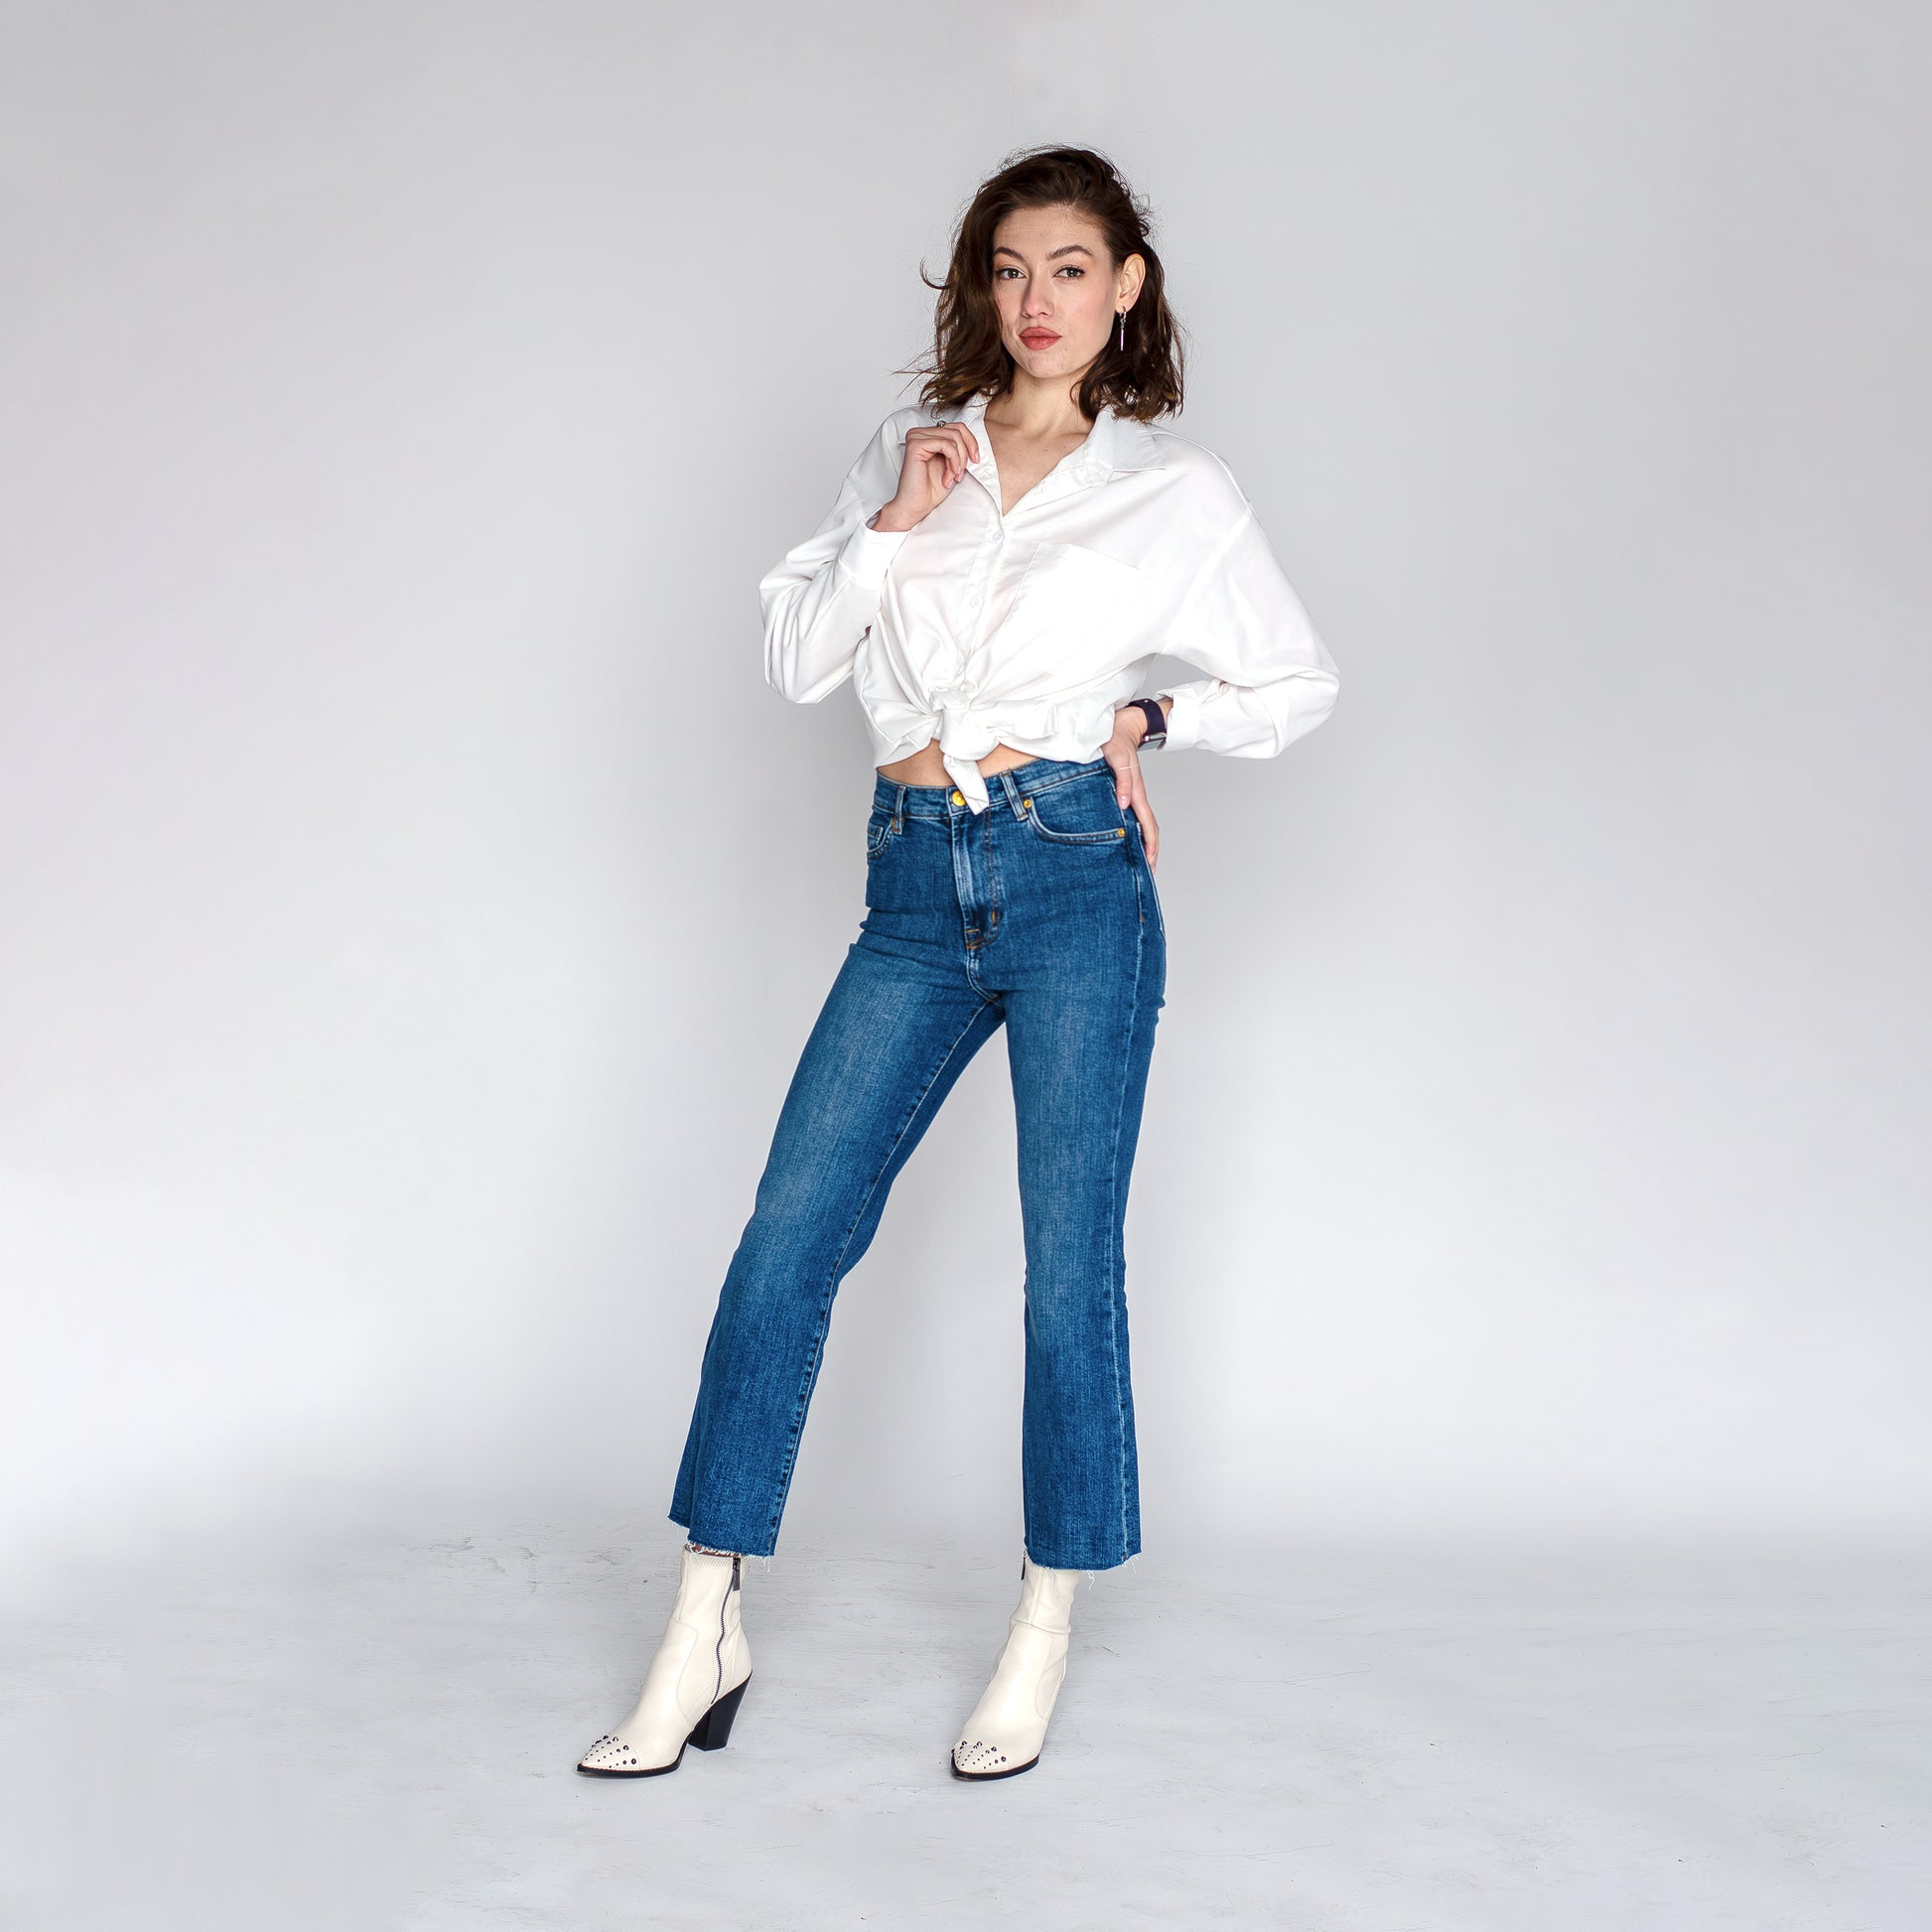 HIGH-RISE MINI FLARE JEANS IN WASHED BLUE – Thaleypa Aparel